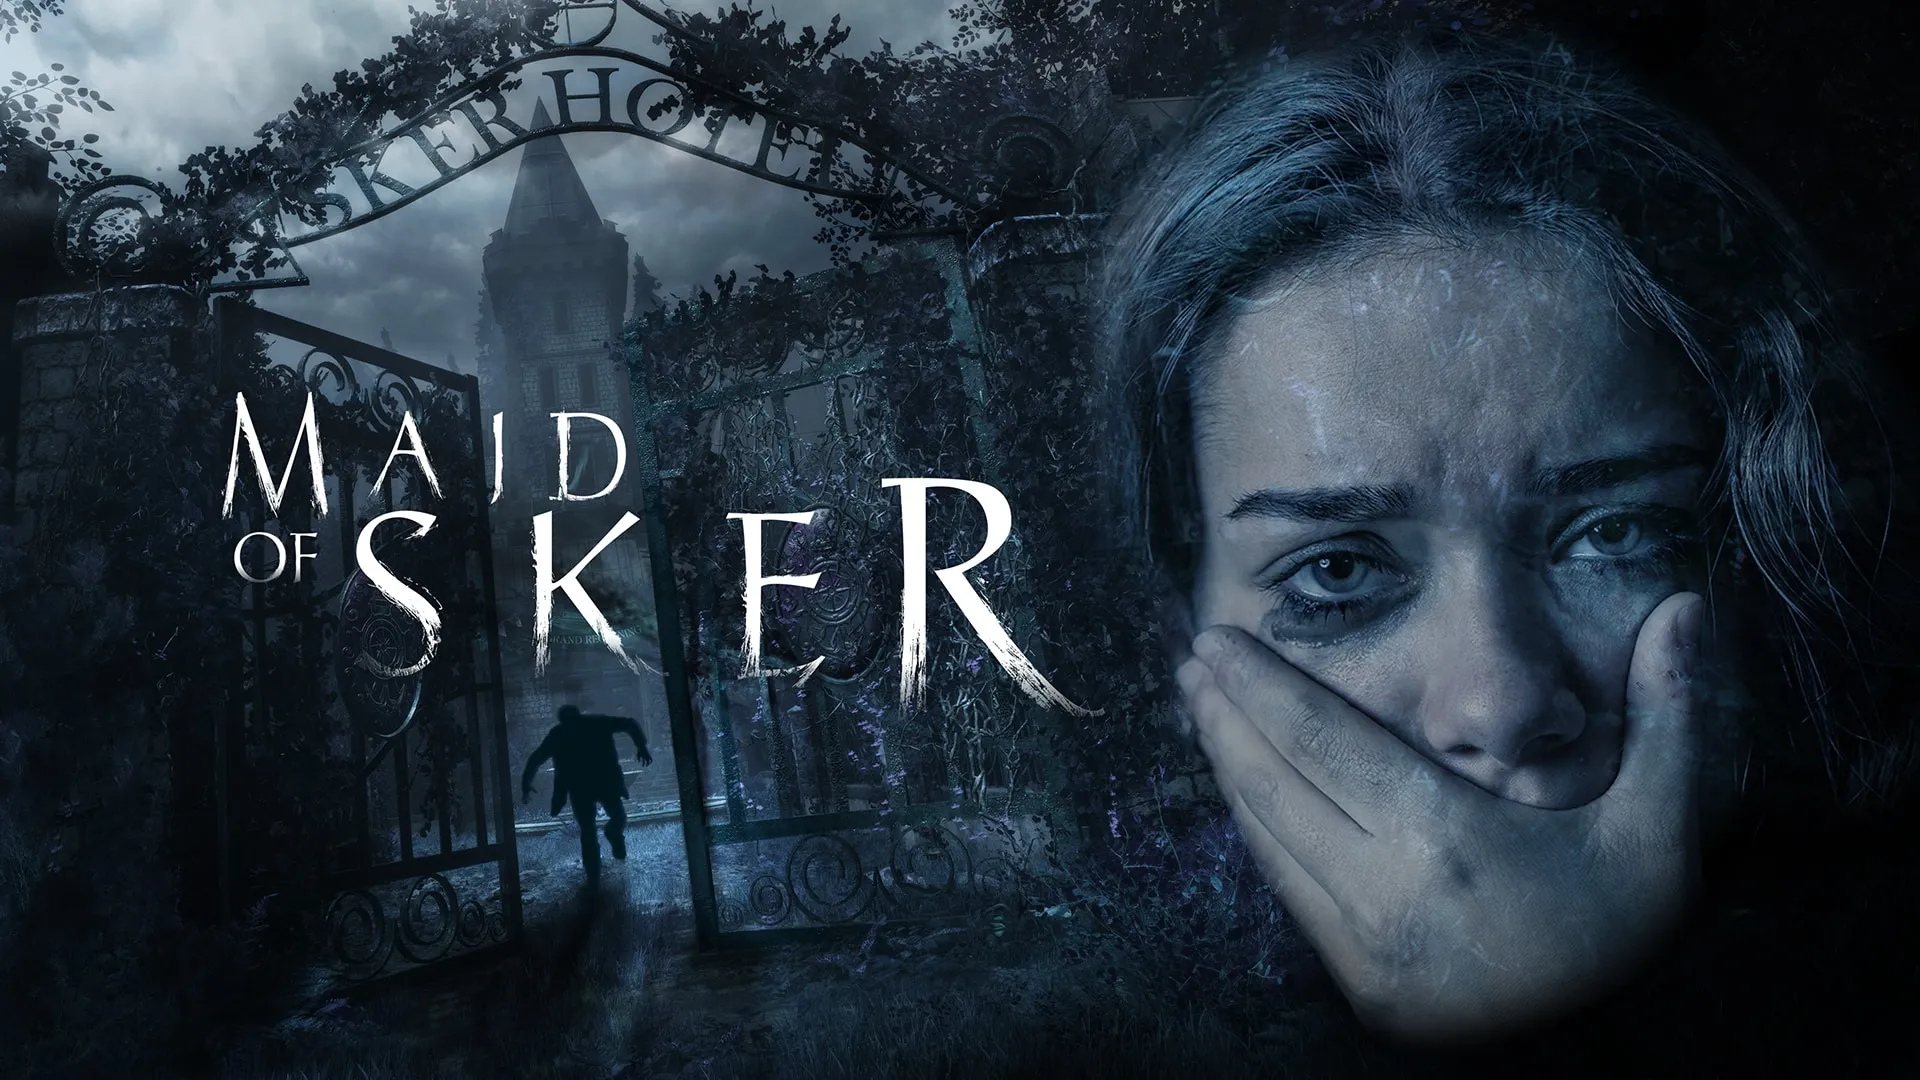 Maid of Sker Review: Underrated Survival Horror Inspired by Welsh Story [SPOILER FREE]